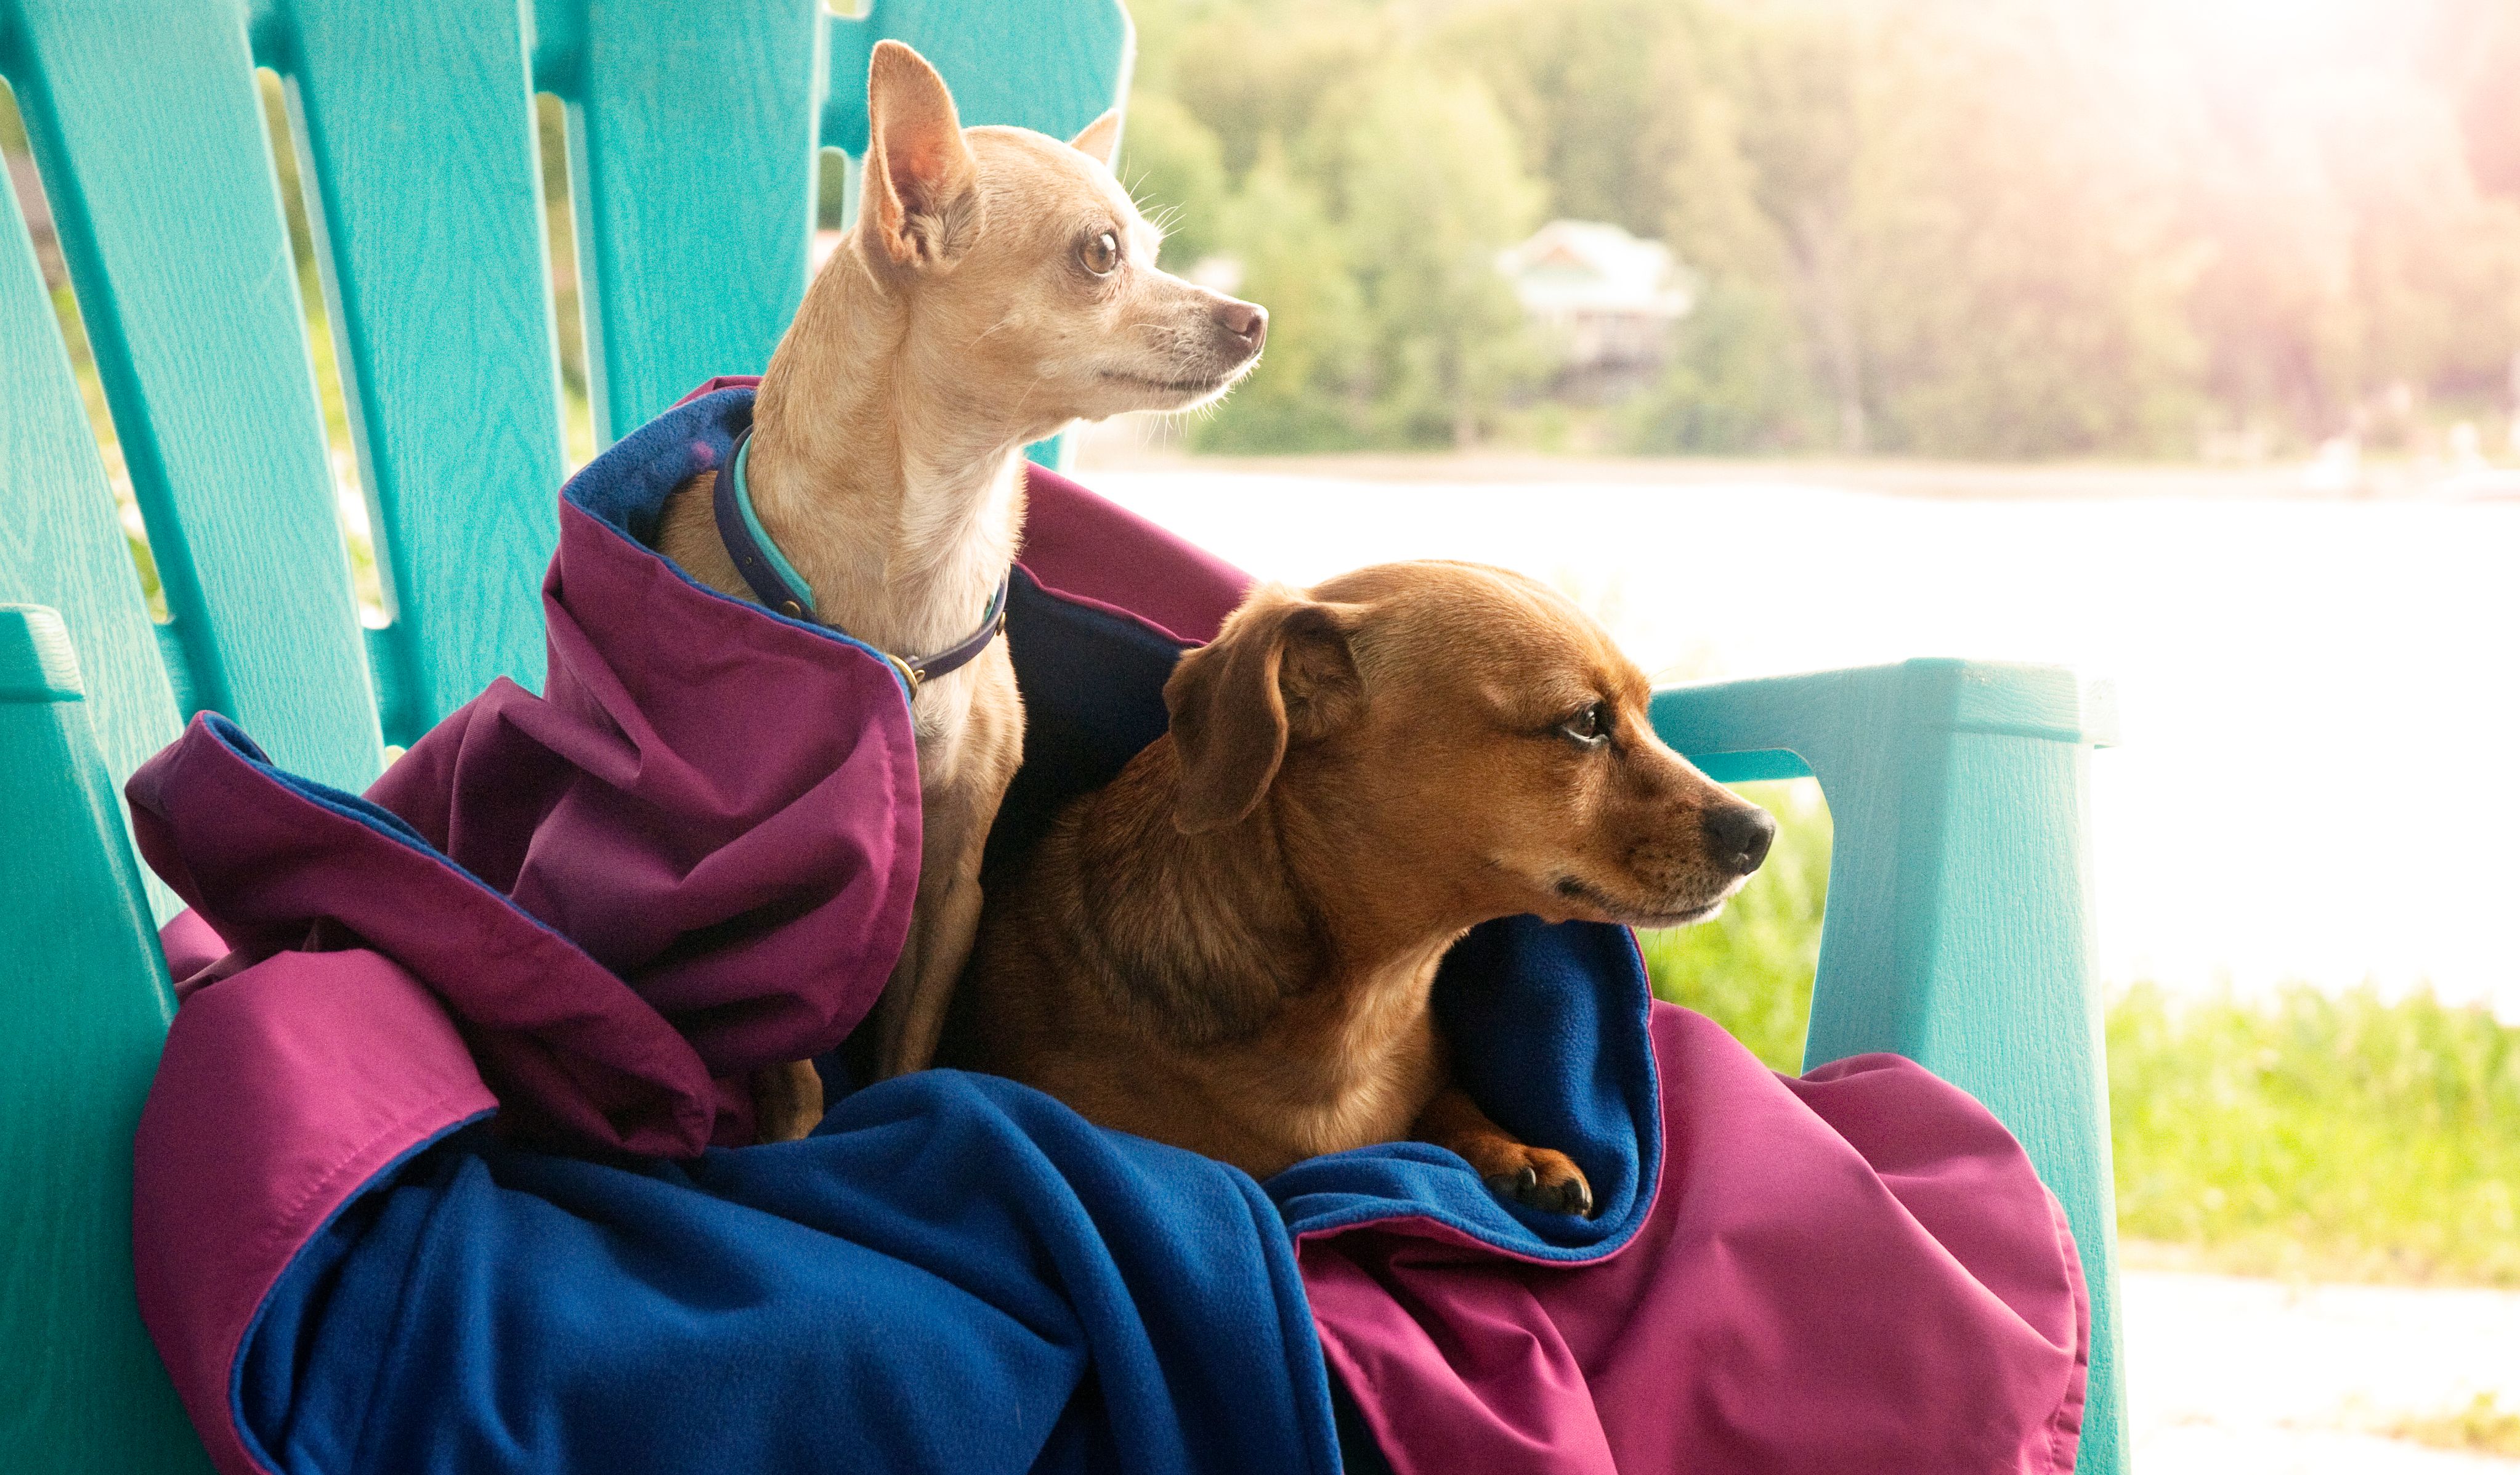 Chilly Dogs Reversible Alpine Blanket